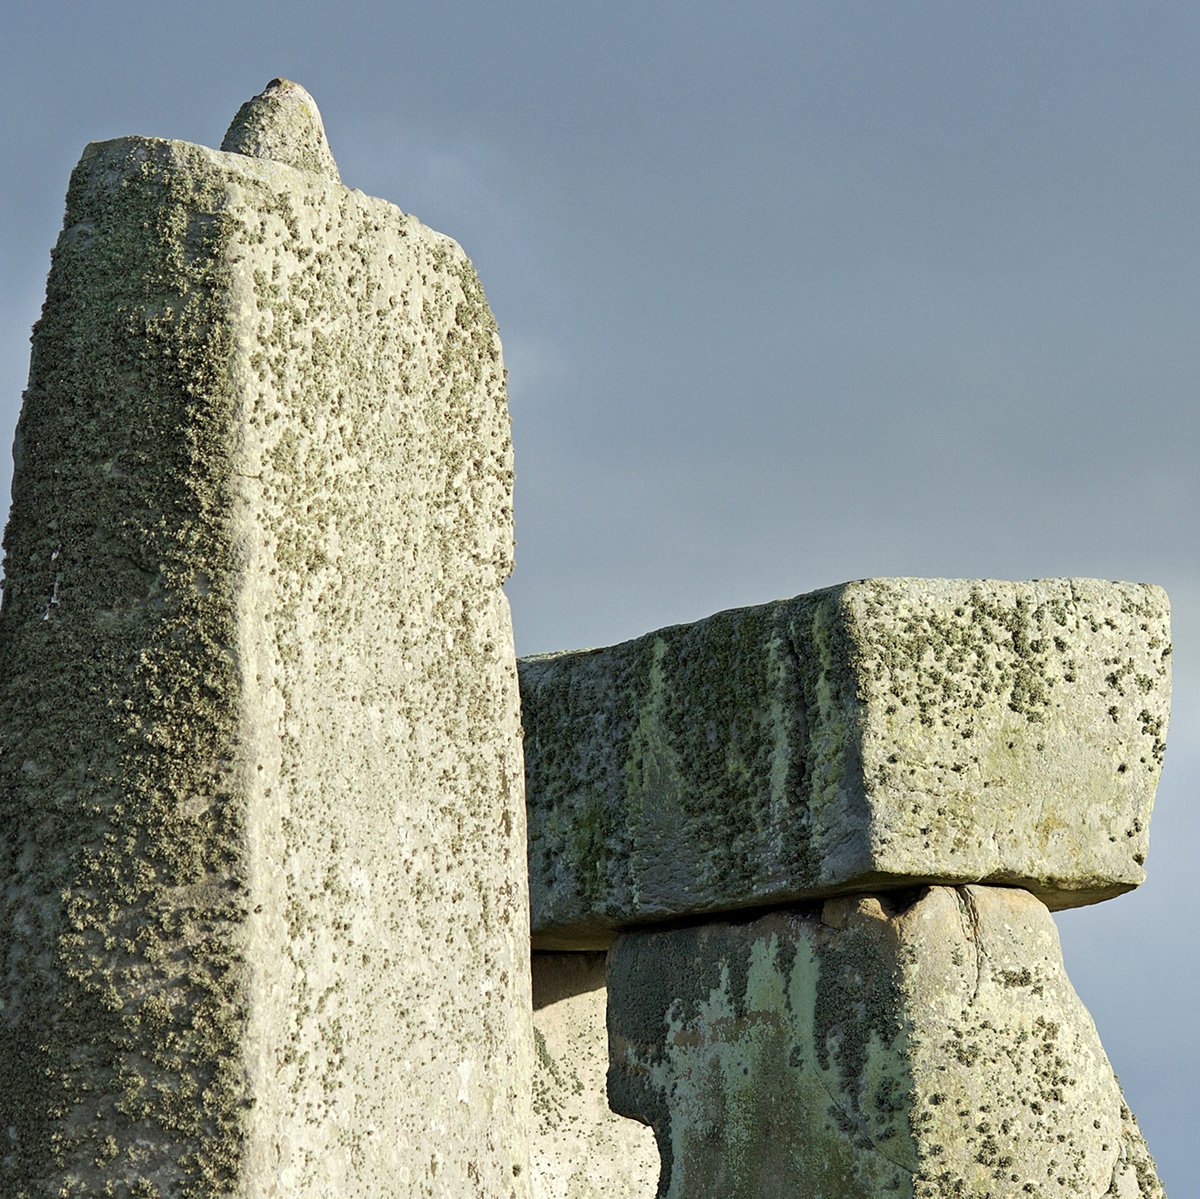 A photograph of Stonehenge, showing the stones with cloudy grey blue skies behind them.